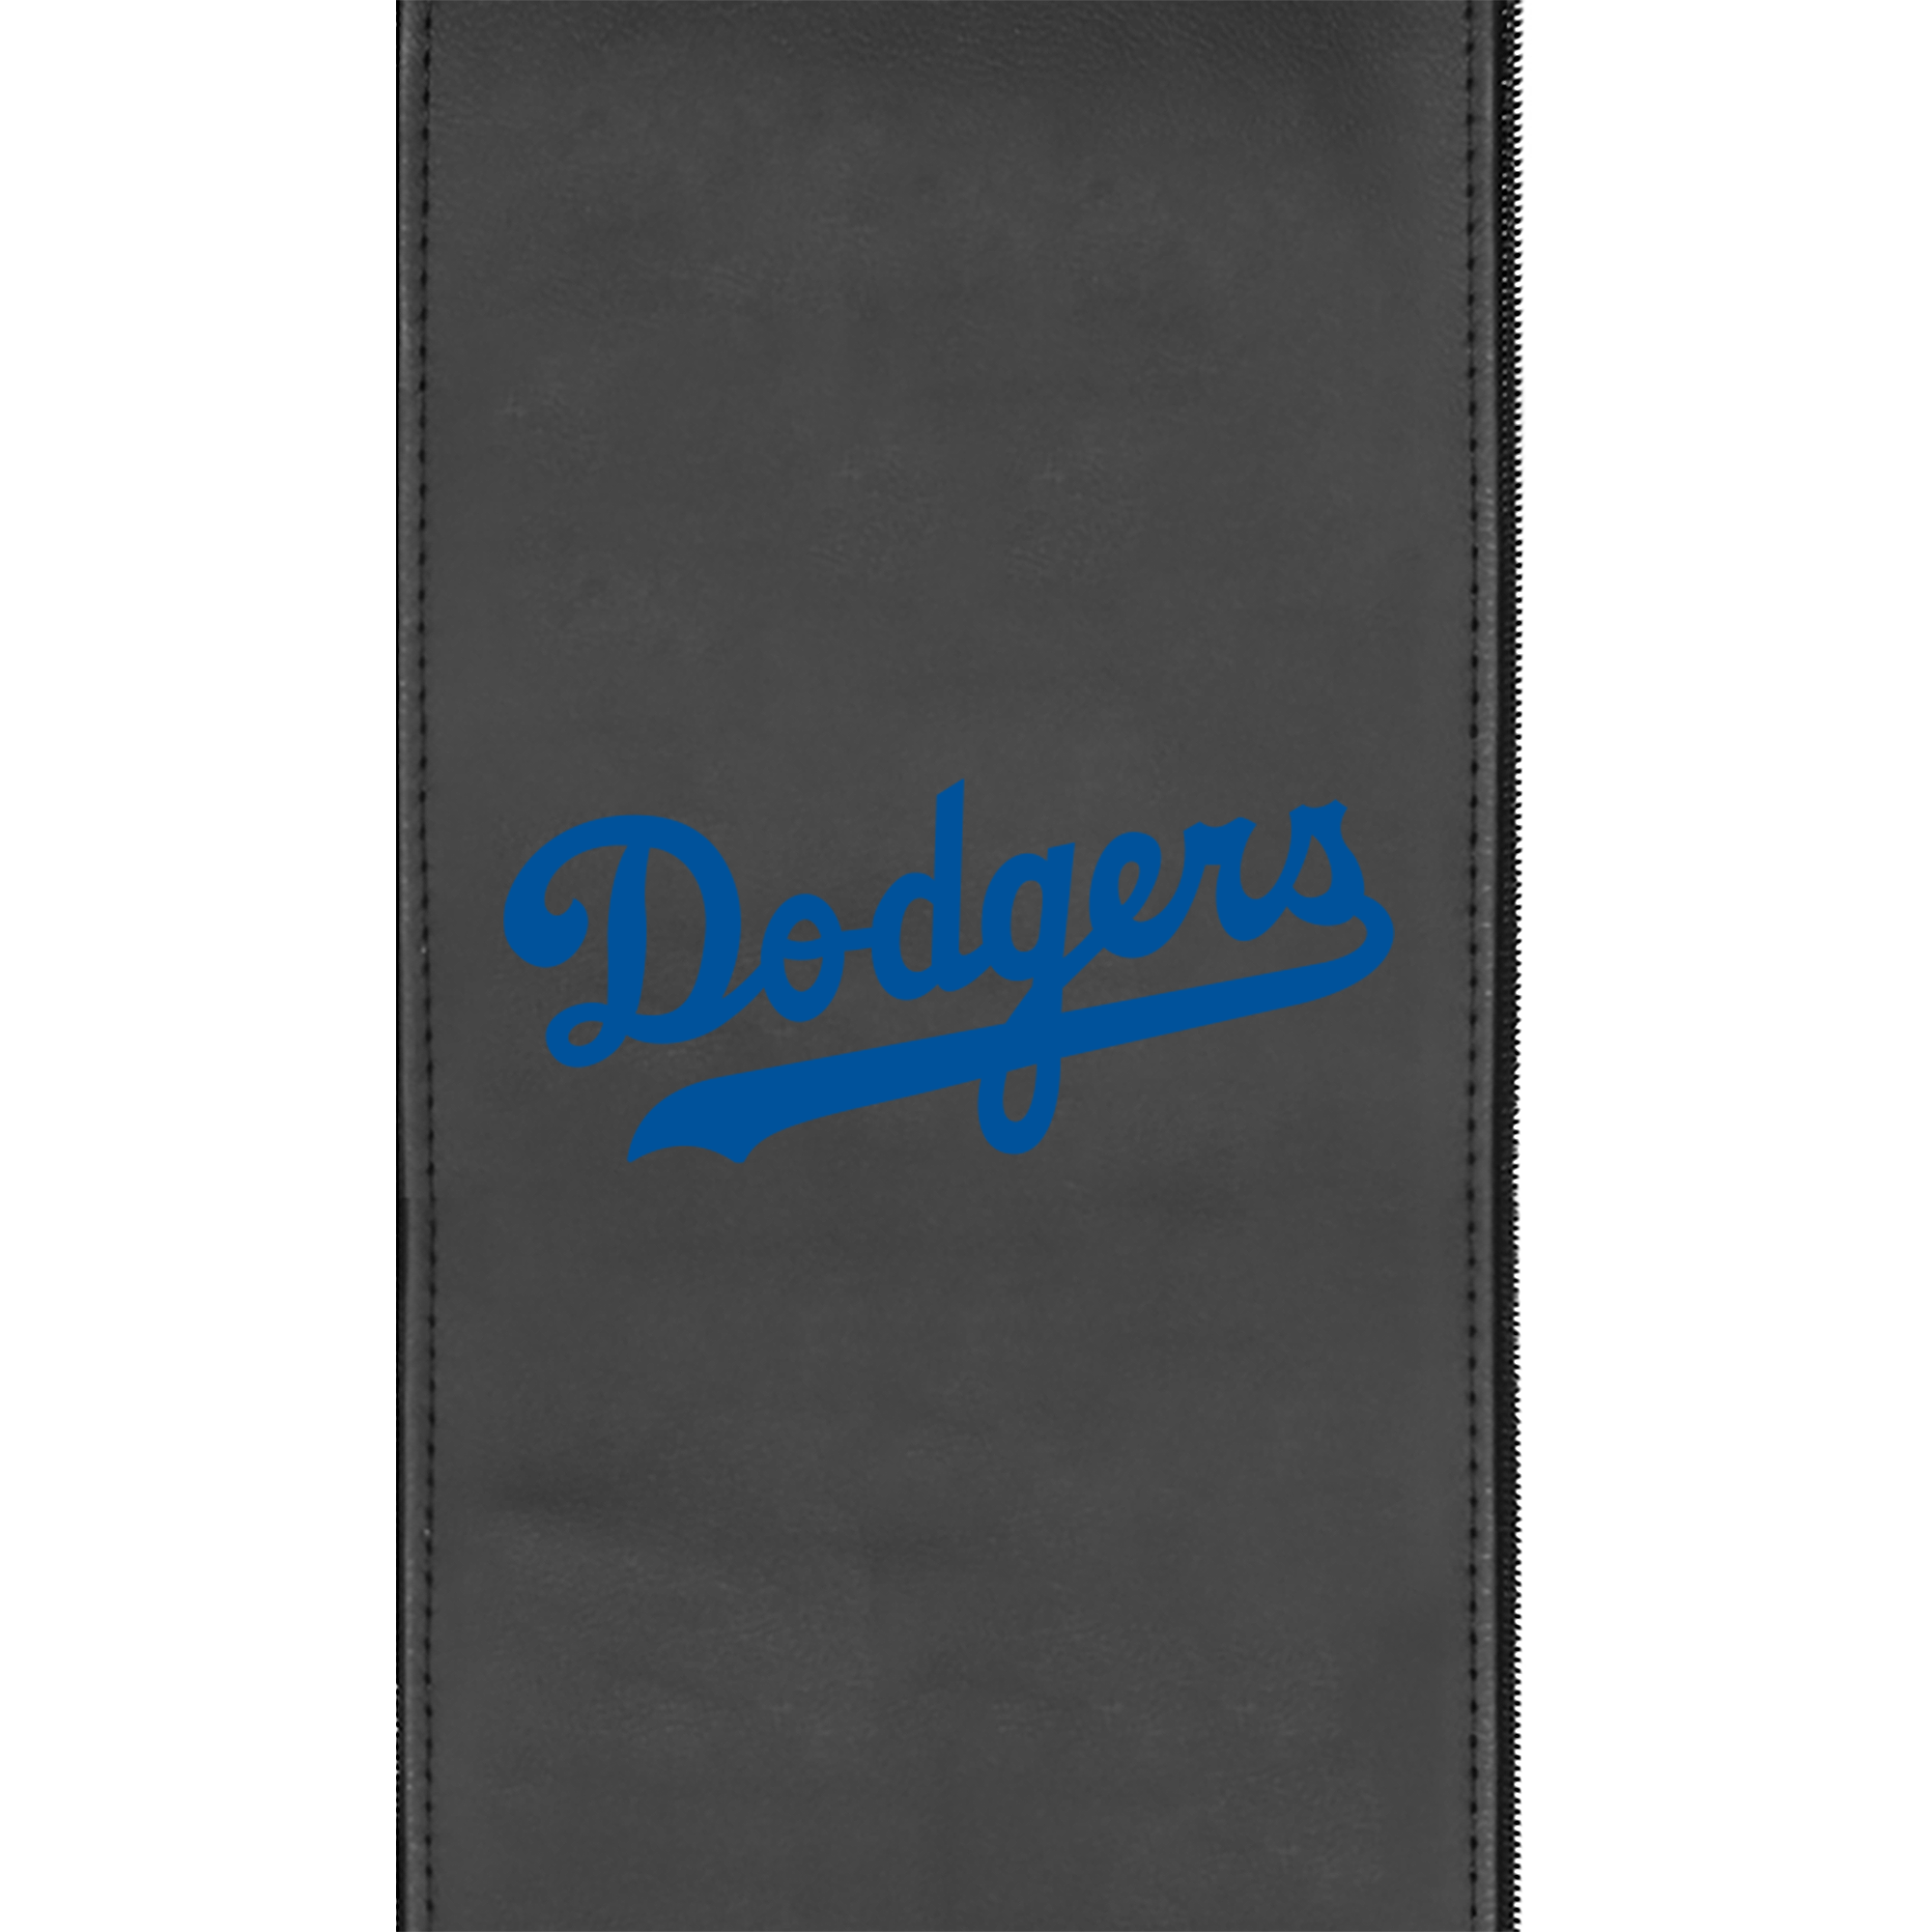 SuiteMax 3.5 VIP Seats with Dodgers Cooperstown Secondary Logo